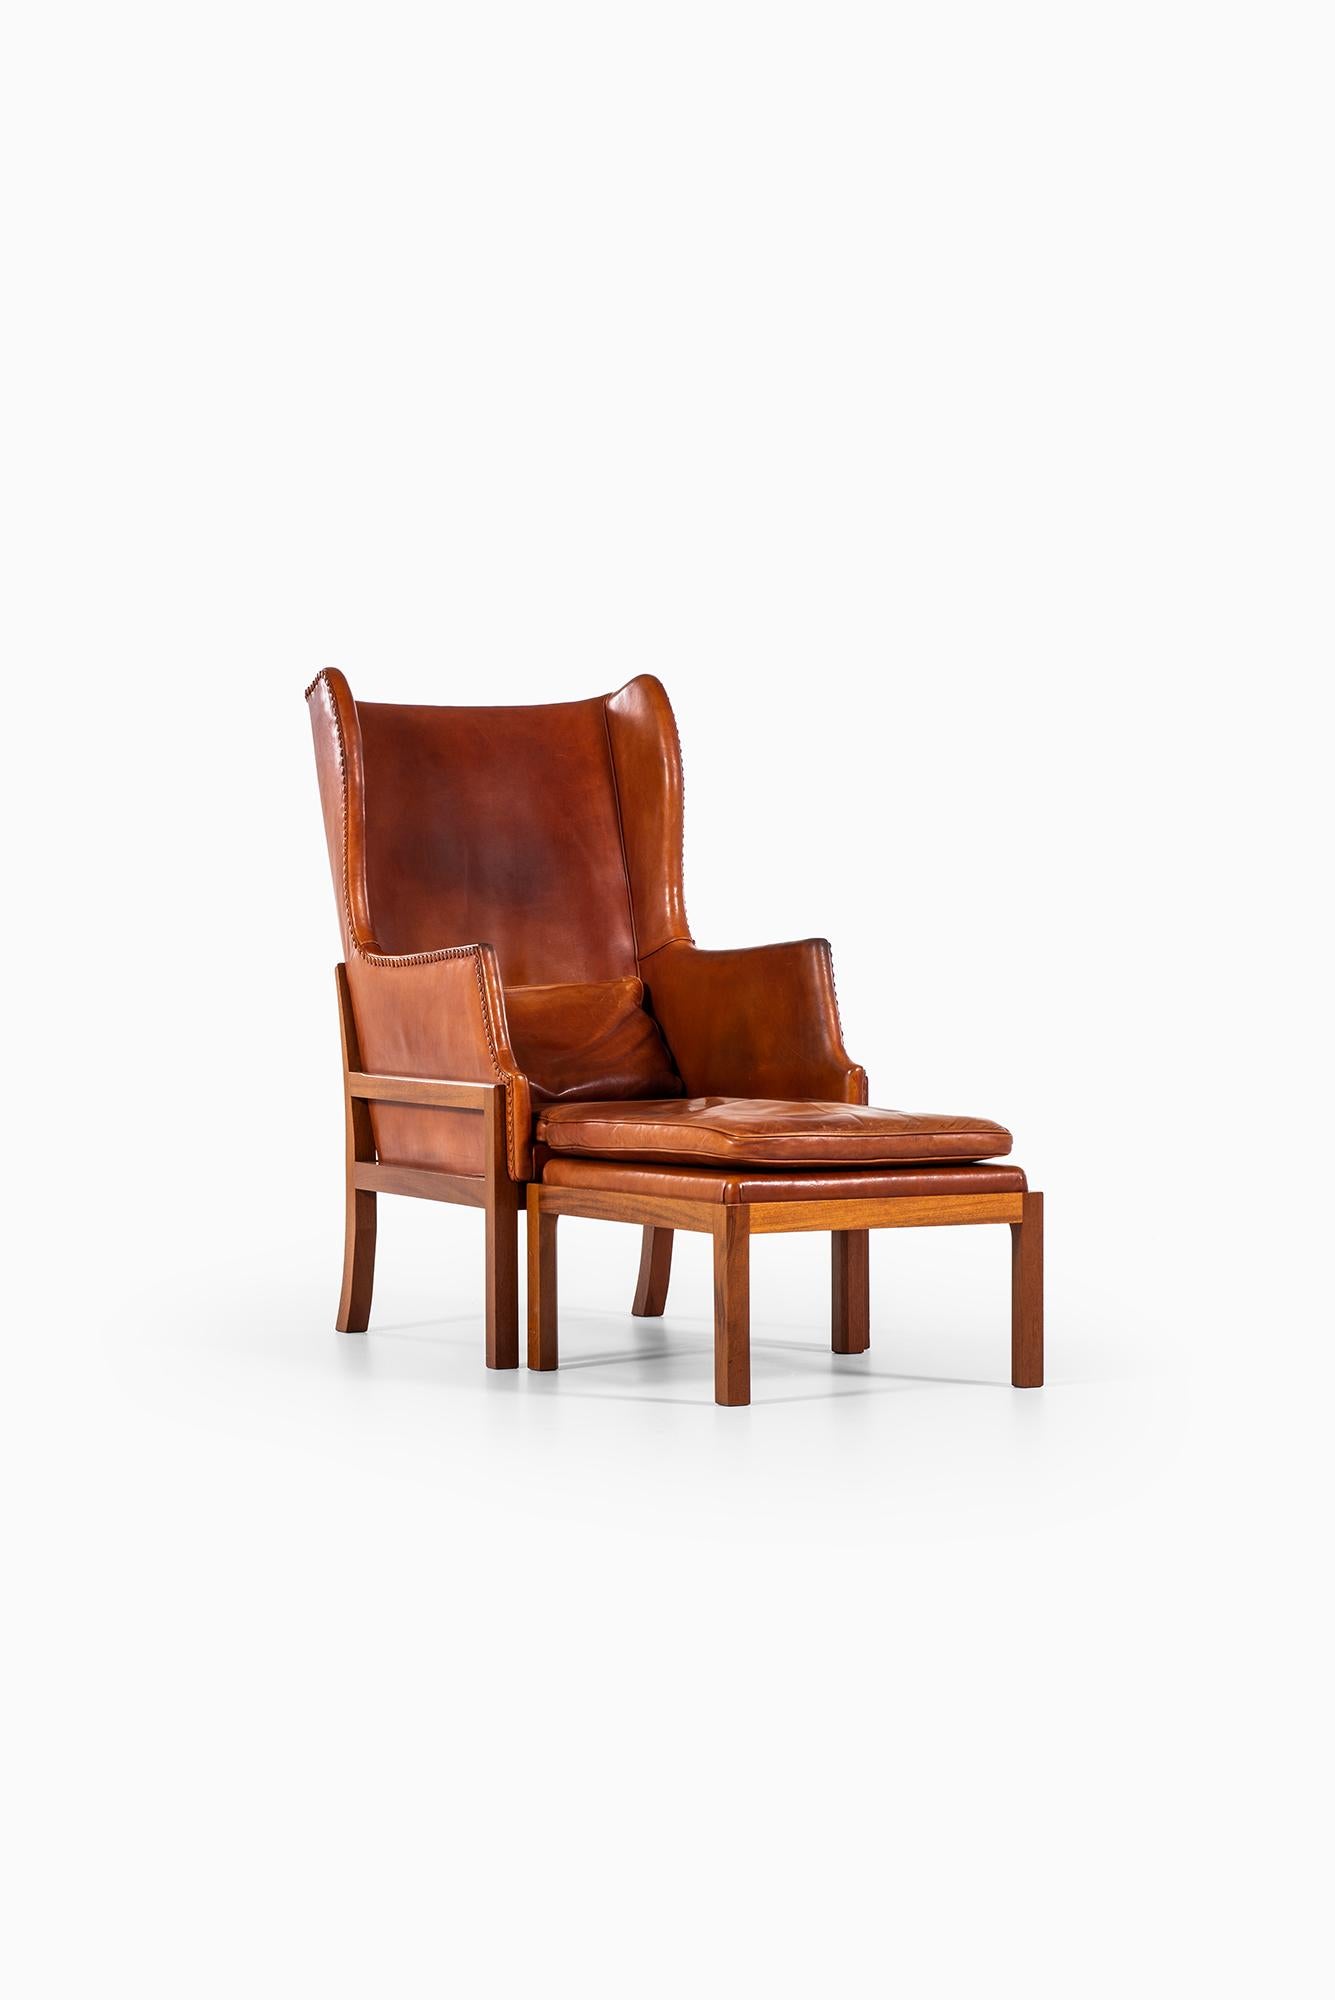 Mid-20th Century Mogens Koch Wing-Back Lounge Chair with Stool by Cabinetmaker Rud Rasmussen